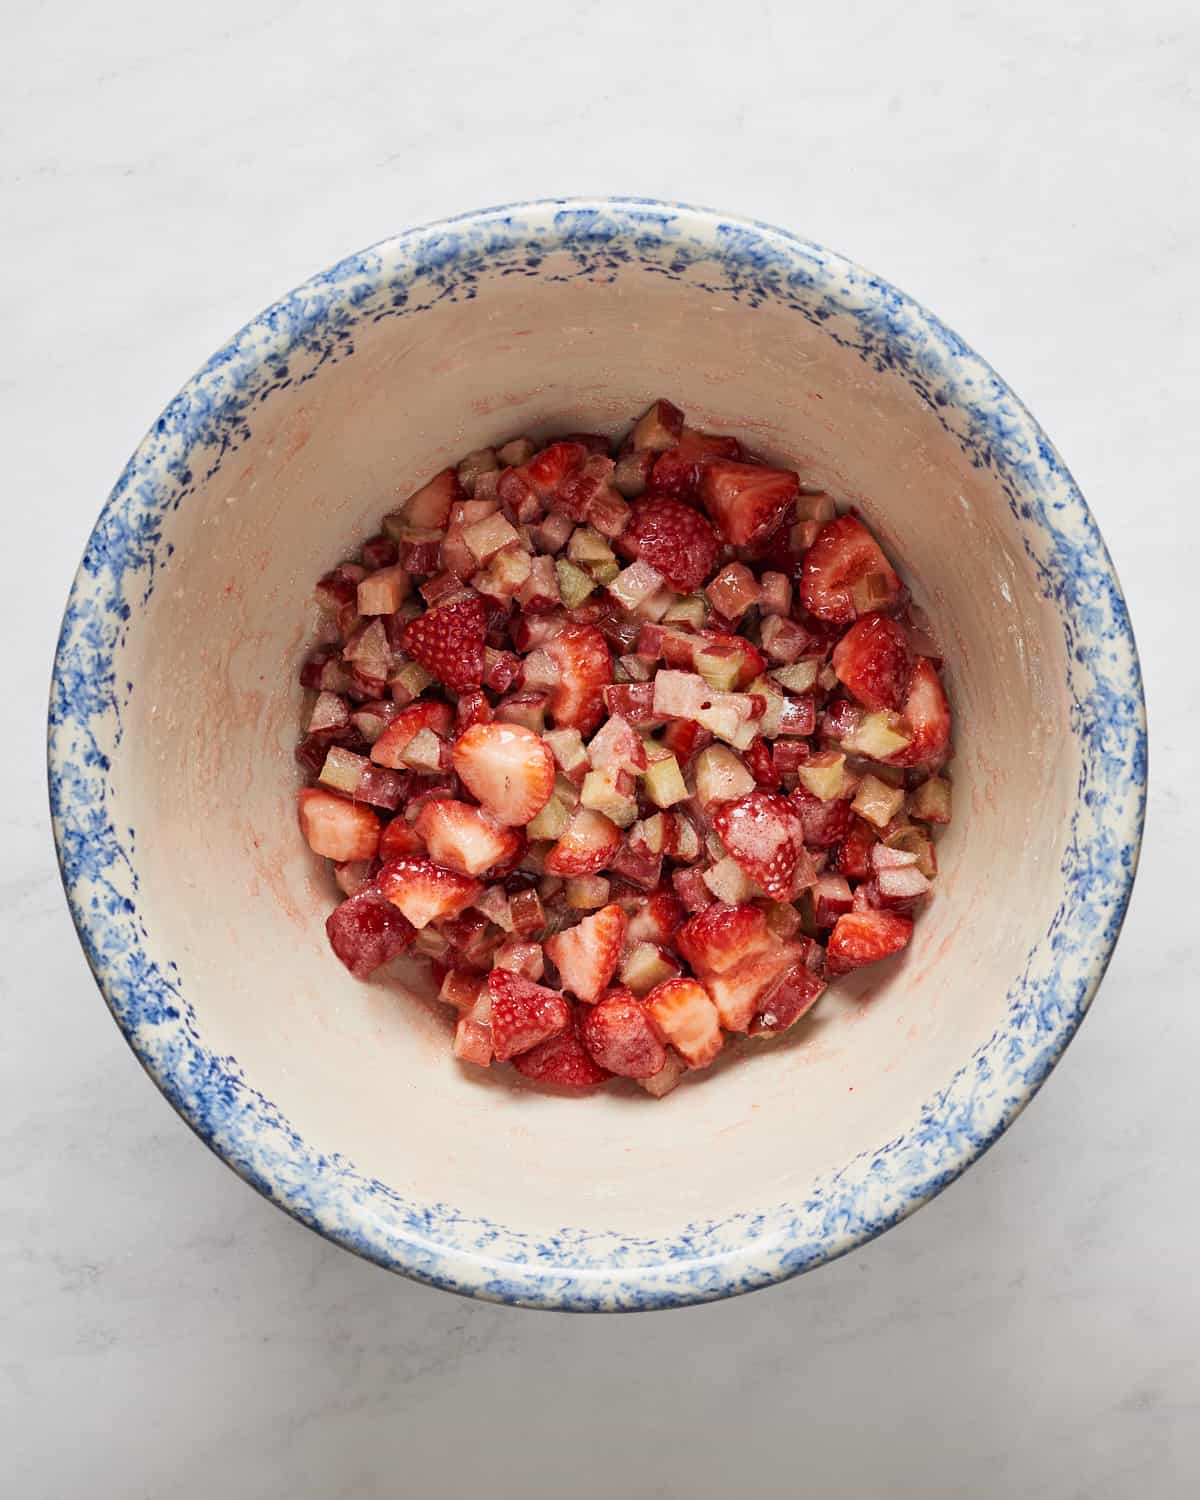 Overhead view of chopped strawberries and rhubarb pie filling in a large bowl.